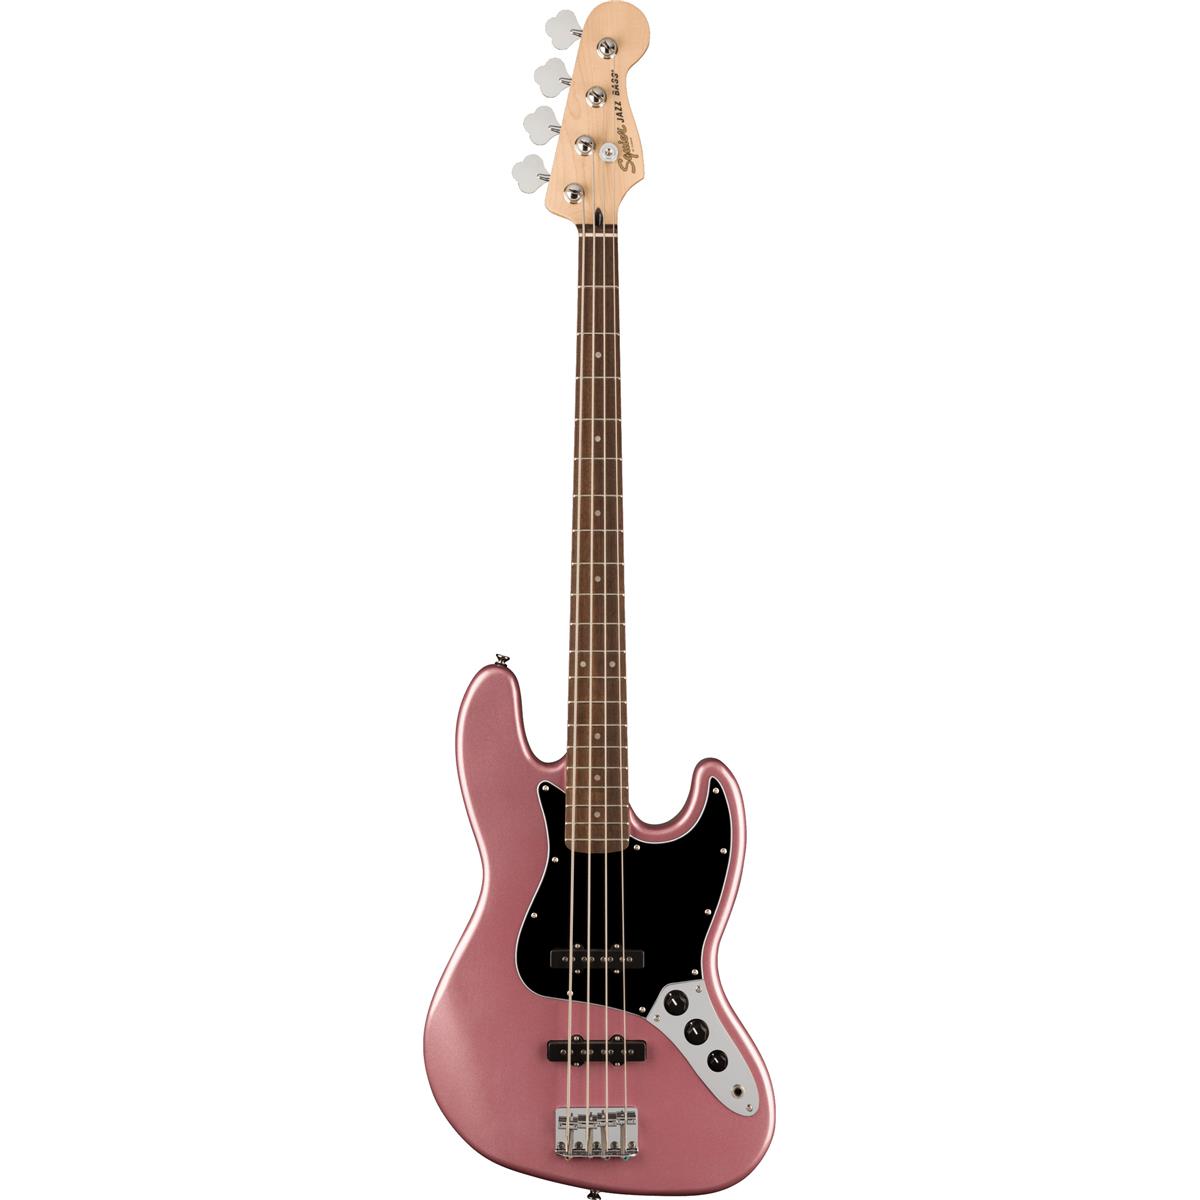 Image of Squier Affinity Series Jazz Bass Guitar